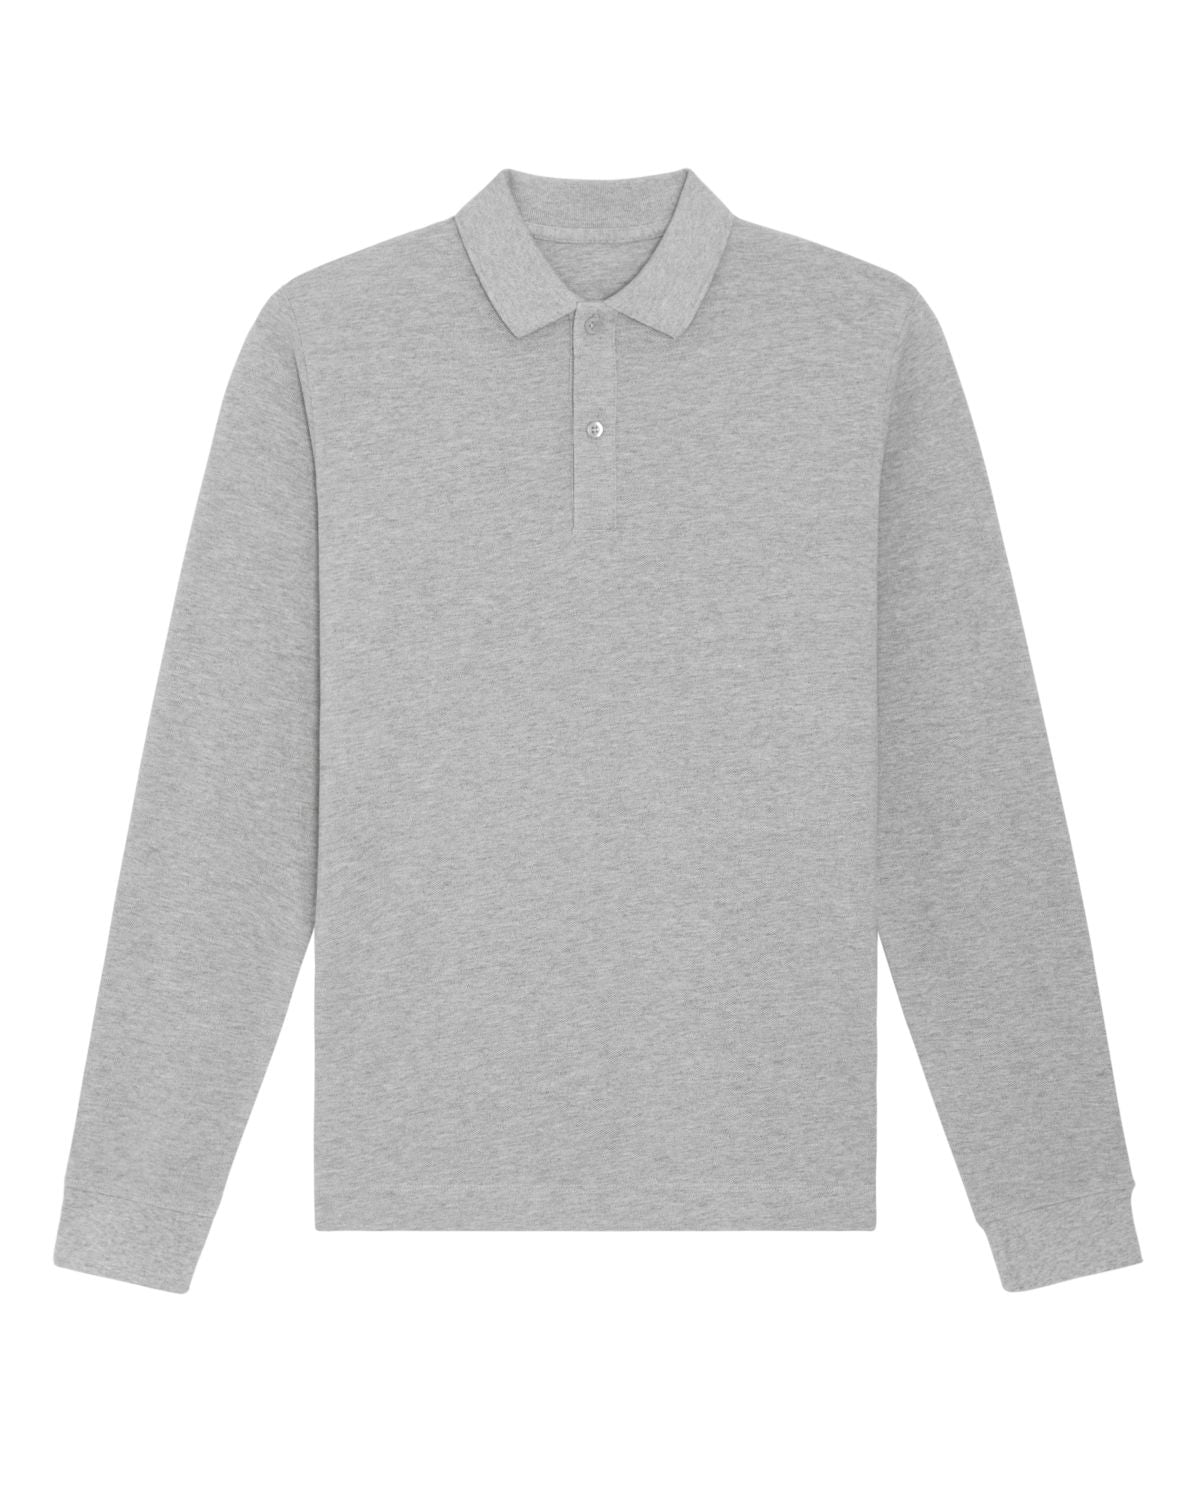 Customize your own sustainable Polo Long Sleeve made of 100% GOTS-certified organic cotton